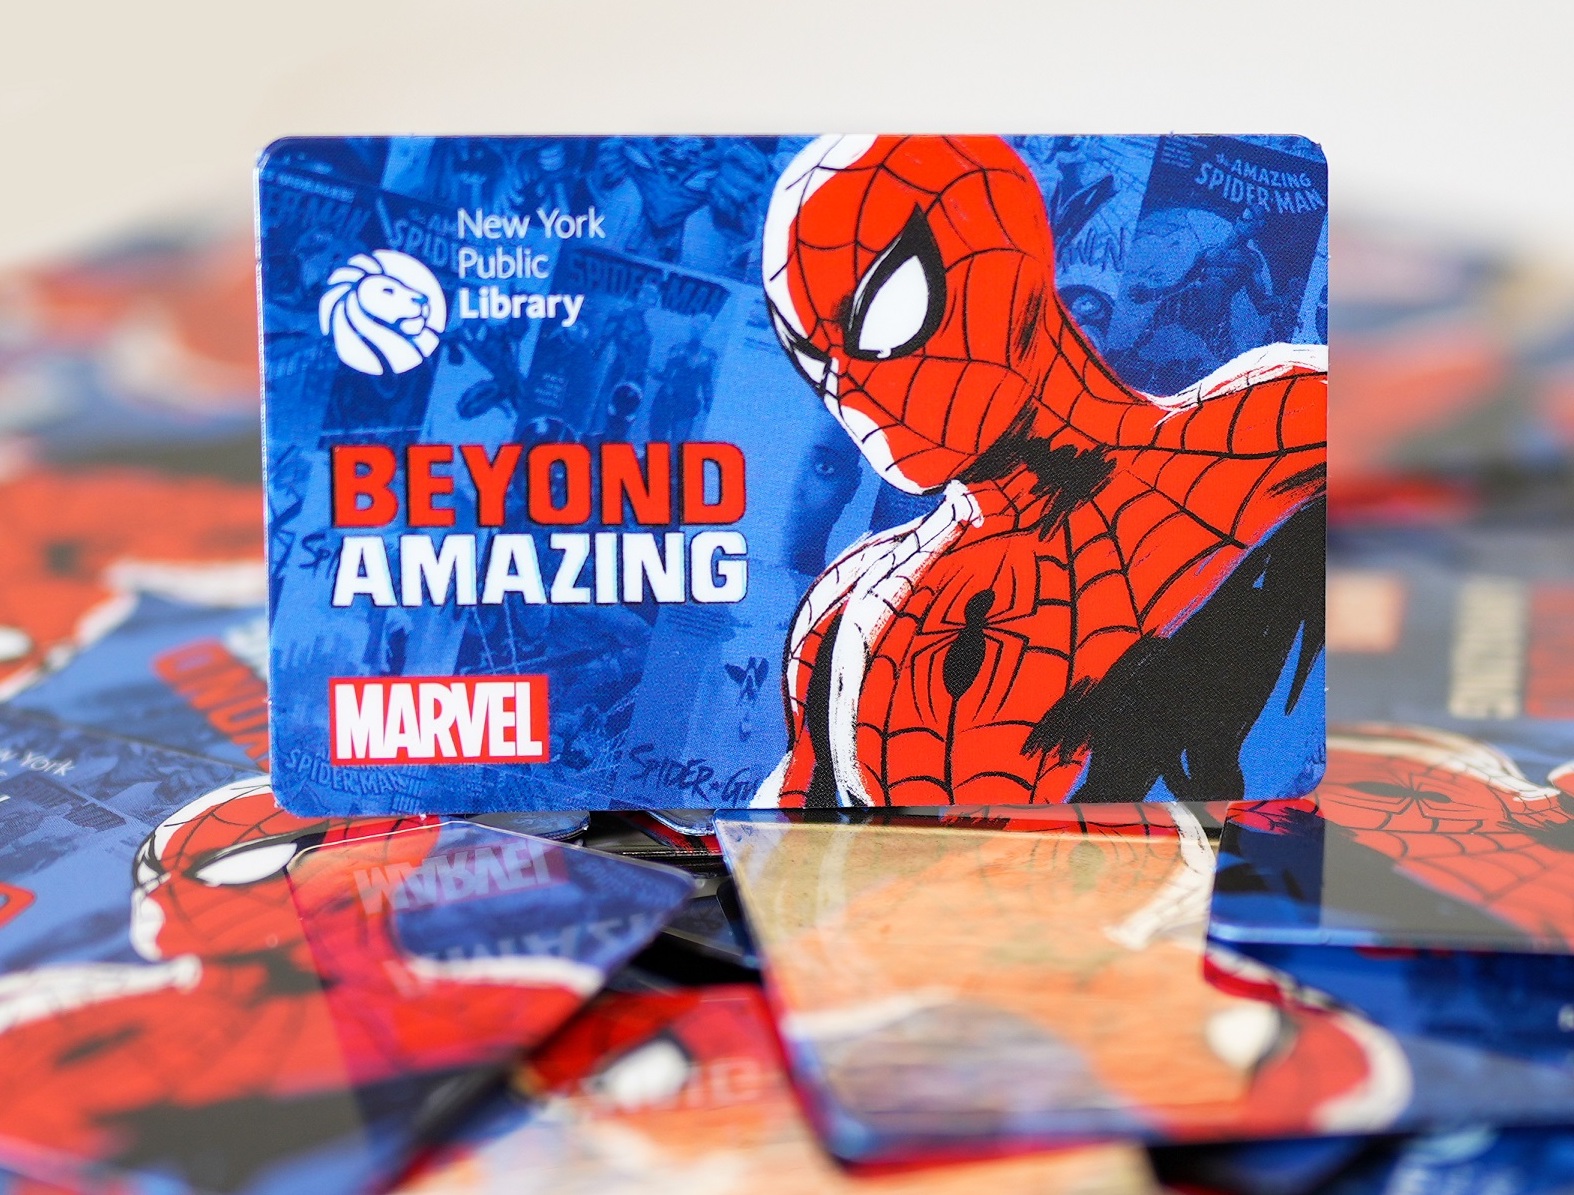 Marvel and New York City Public Library team up for special-edition Spider-Man library card